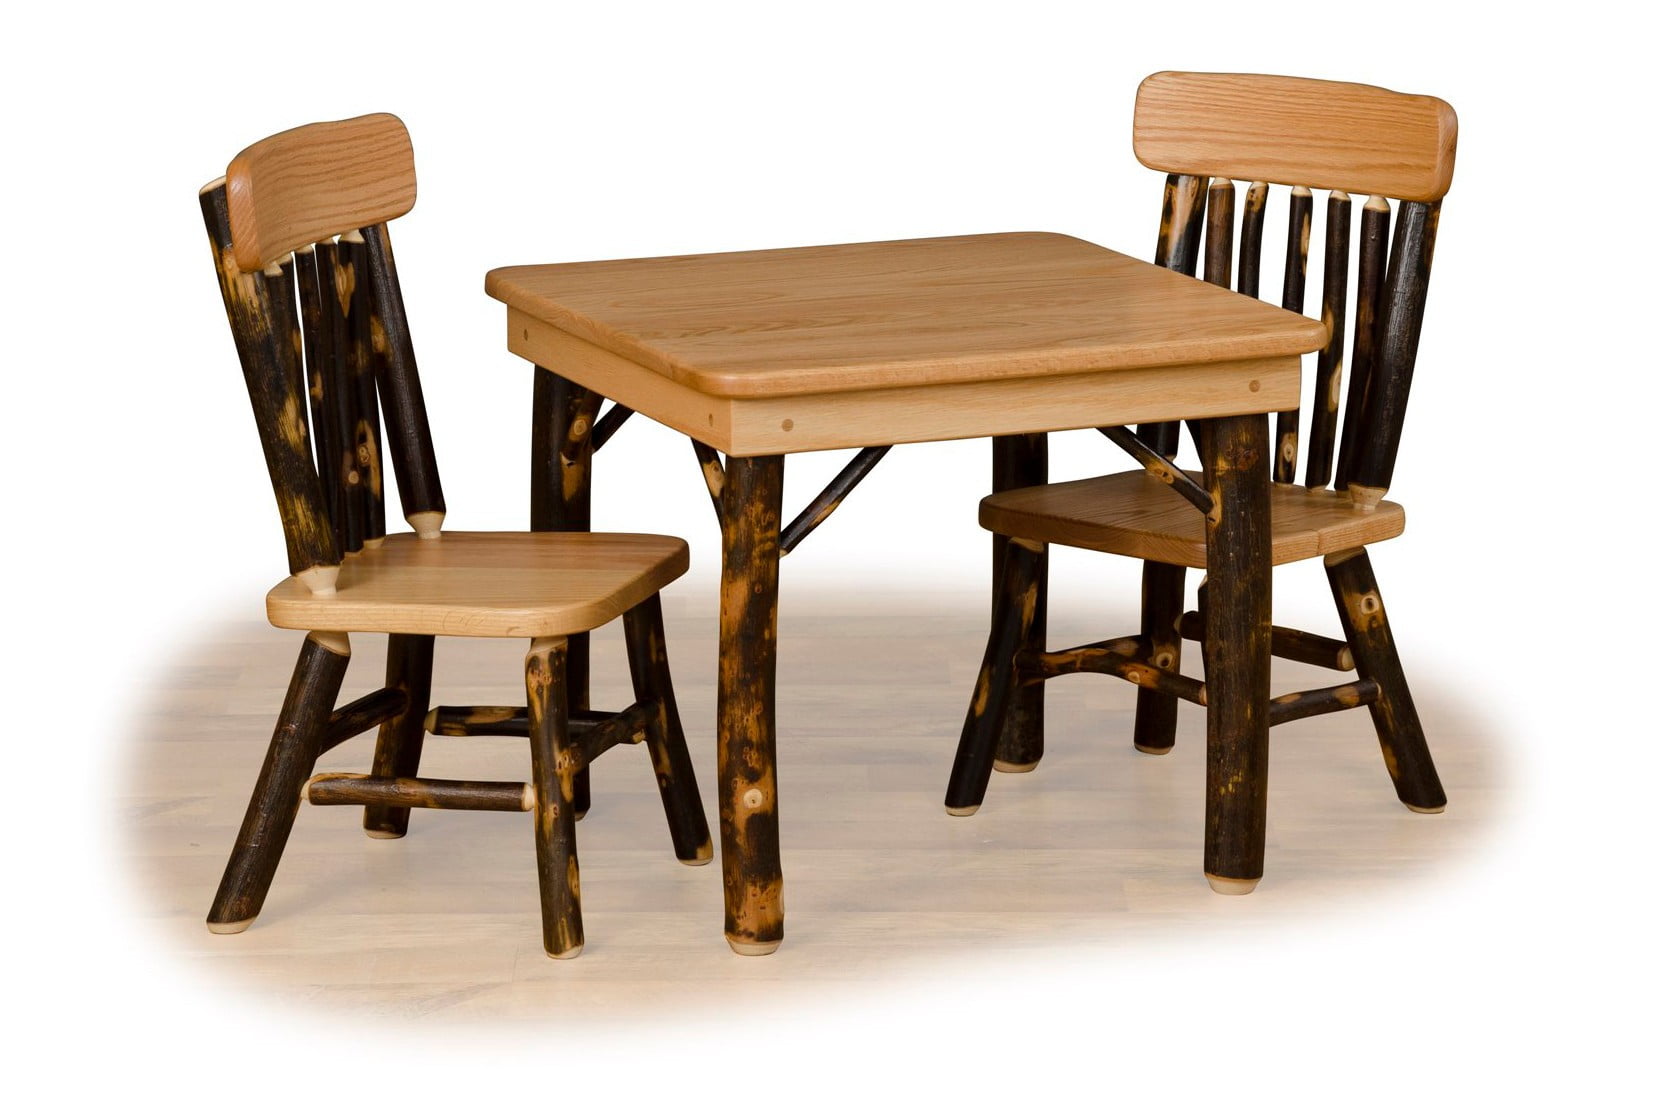 Rustic Hickory Childrens’ Table and Chairs